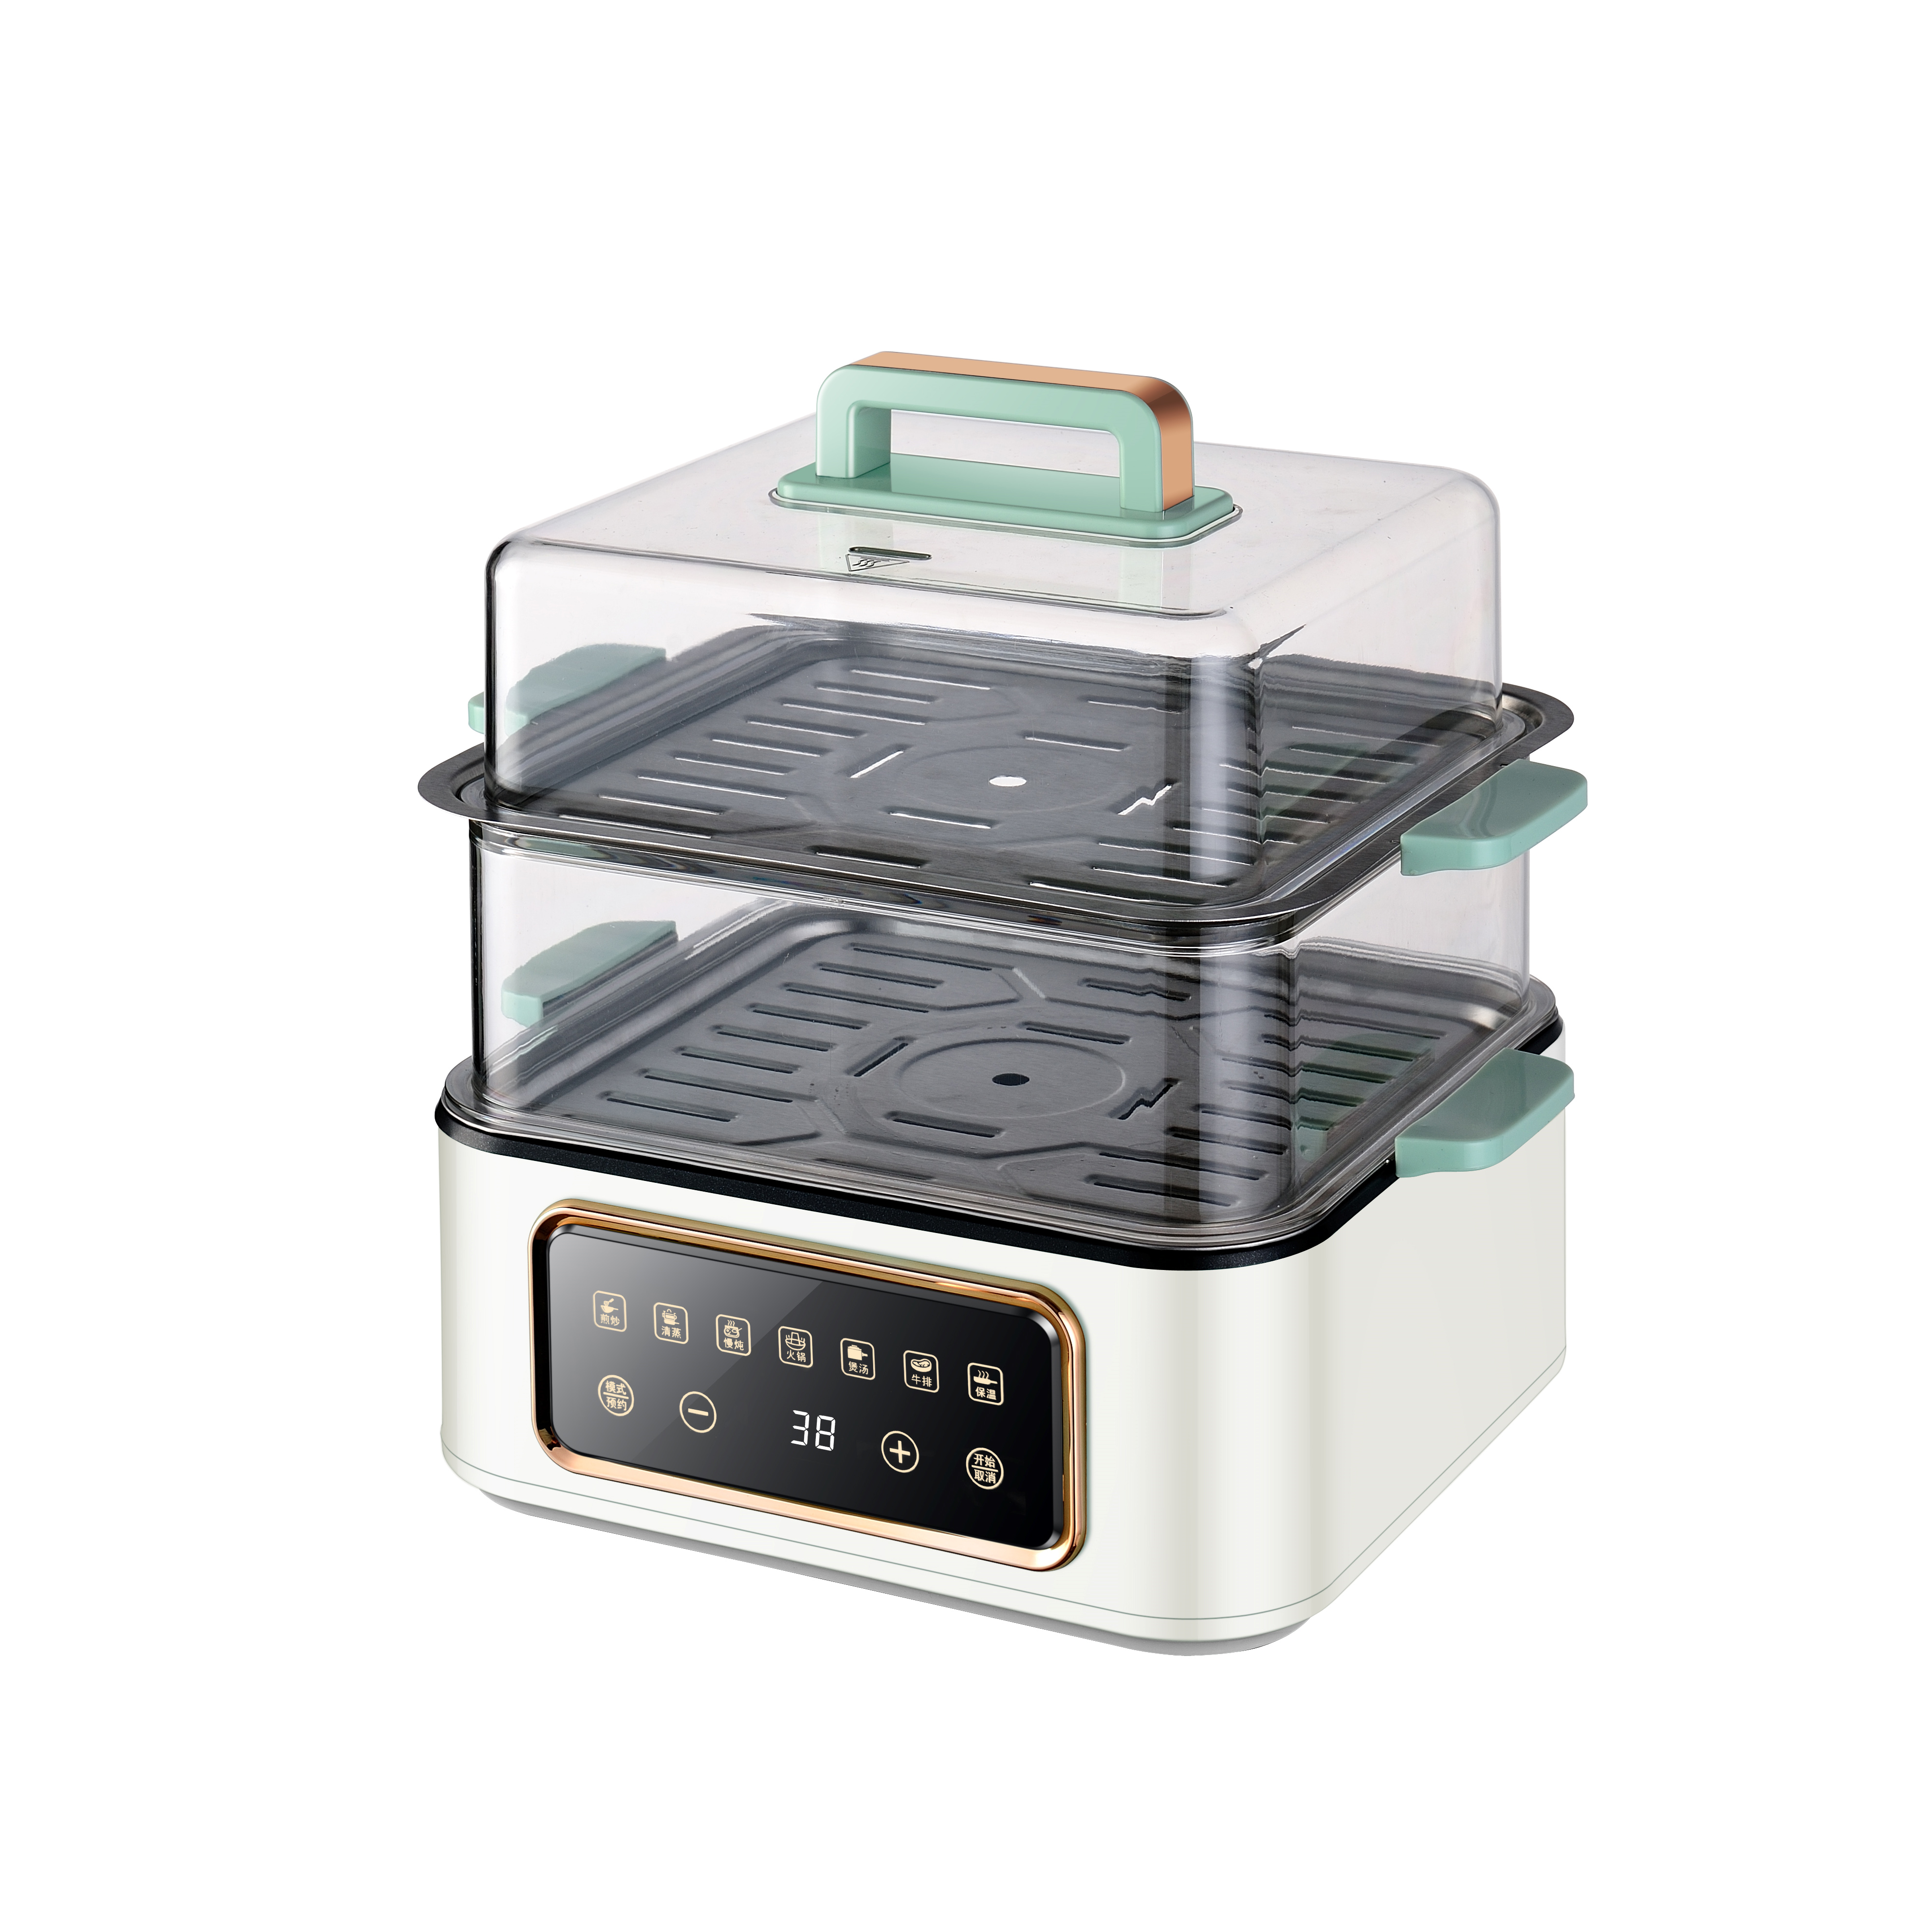 DH-003A  multifunctional electric food steamer  with 7 presets 